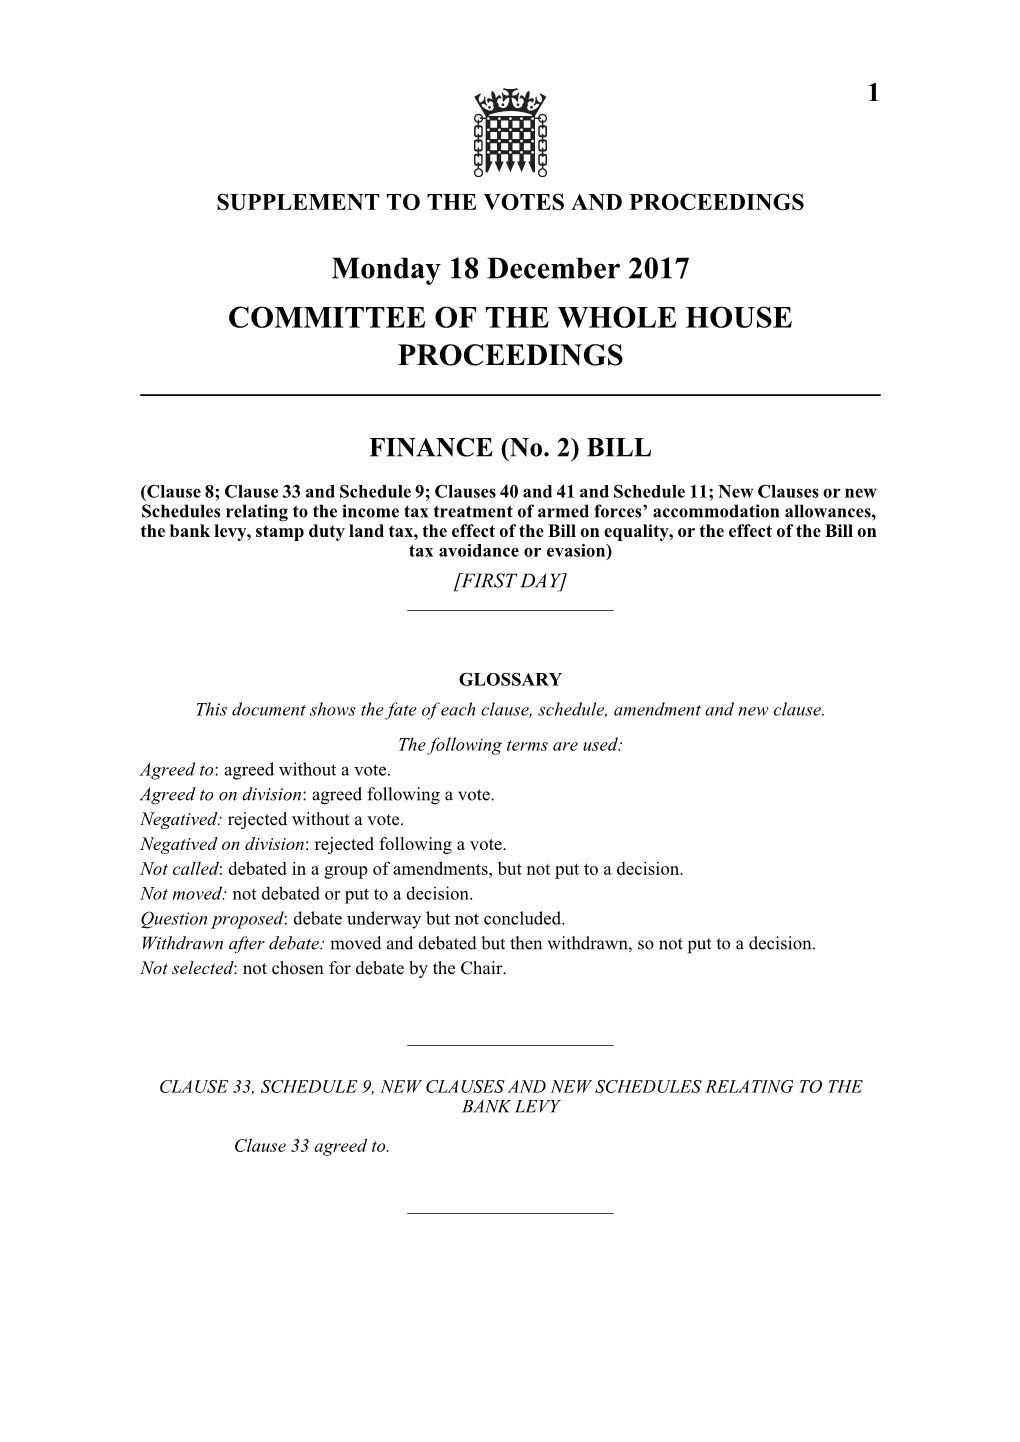 Monday 18 December 2017 COMMITTEE of the WHOLE HOUSE PROCEEDINGS